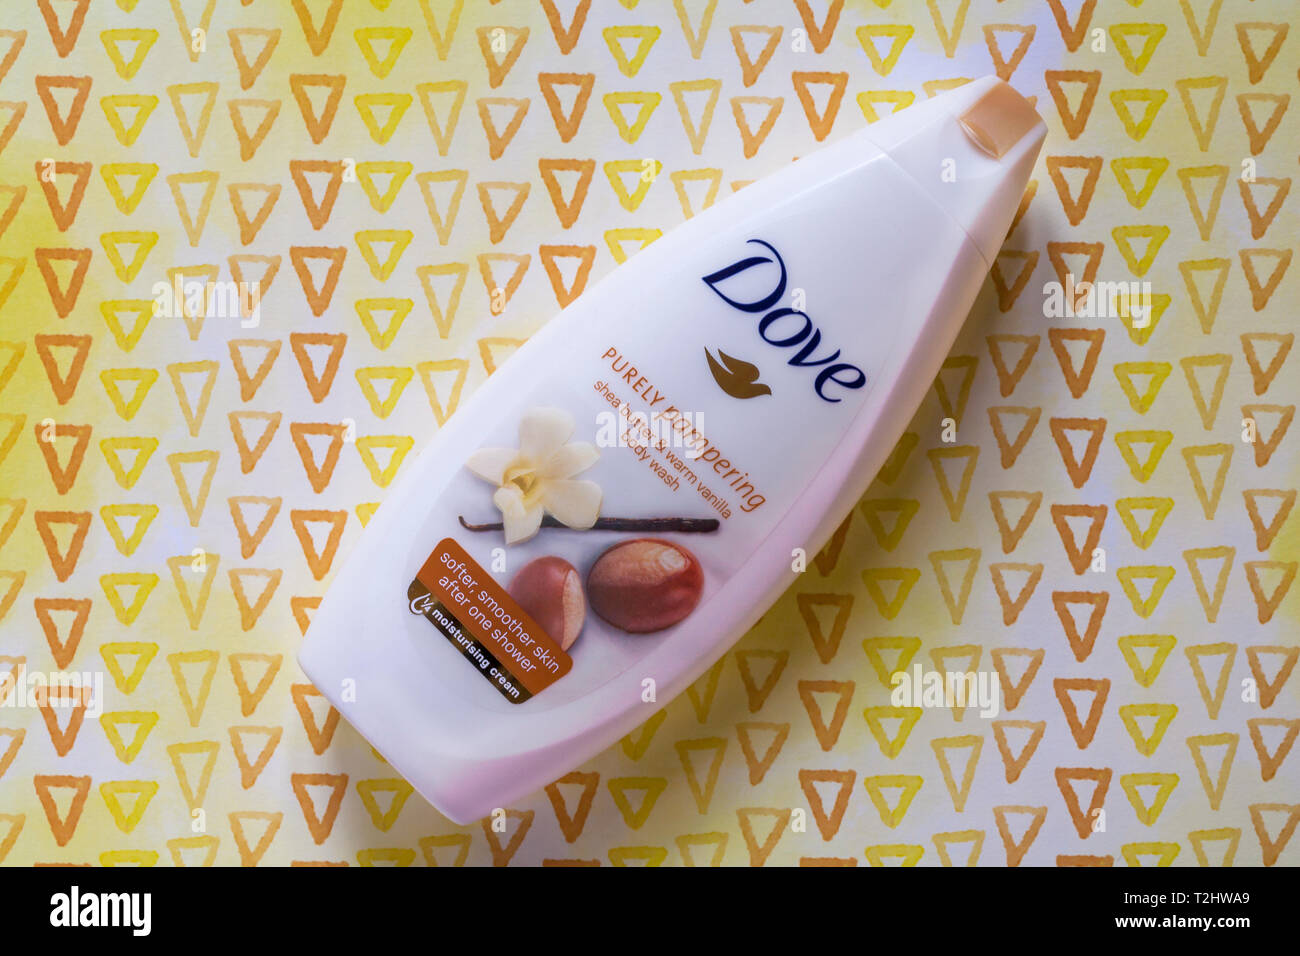 bottle of Dove purely pampering shea butter & warm vanilla body wash on patterned background Stock Photo